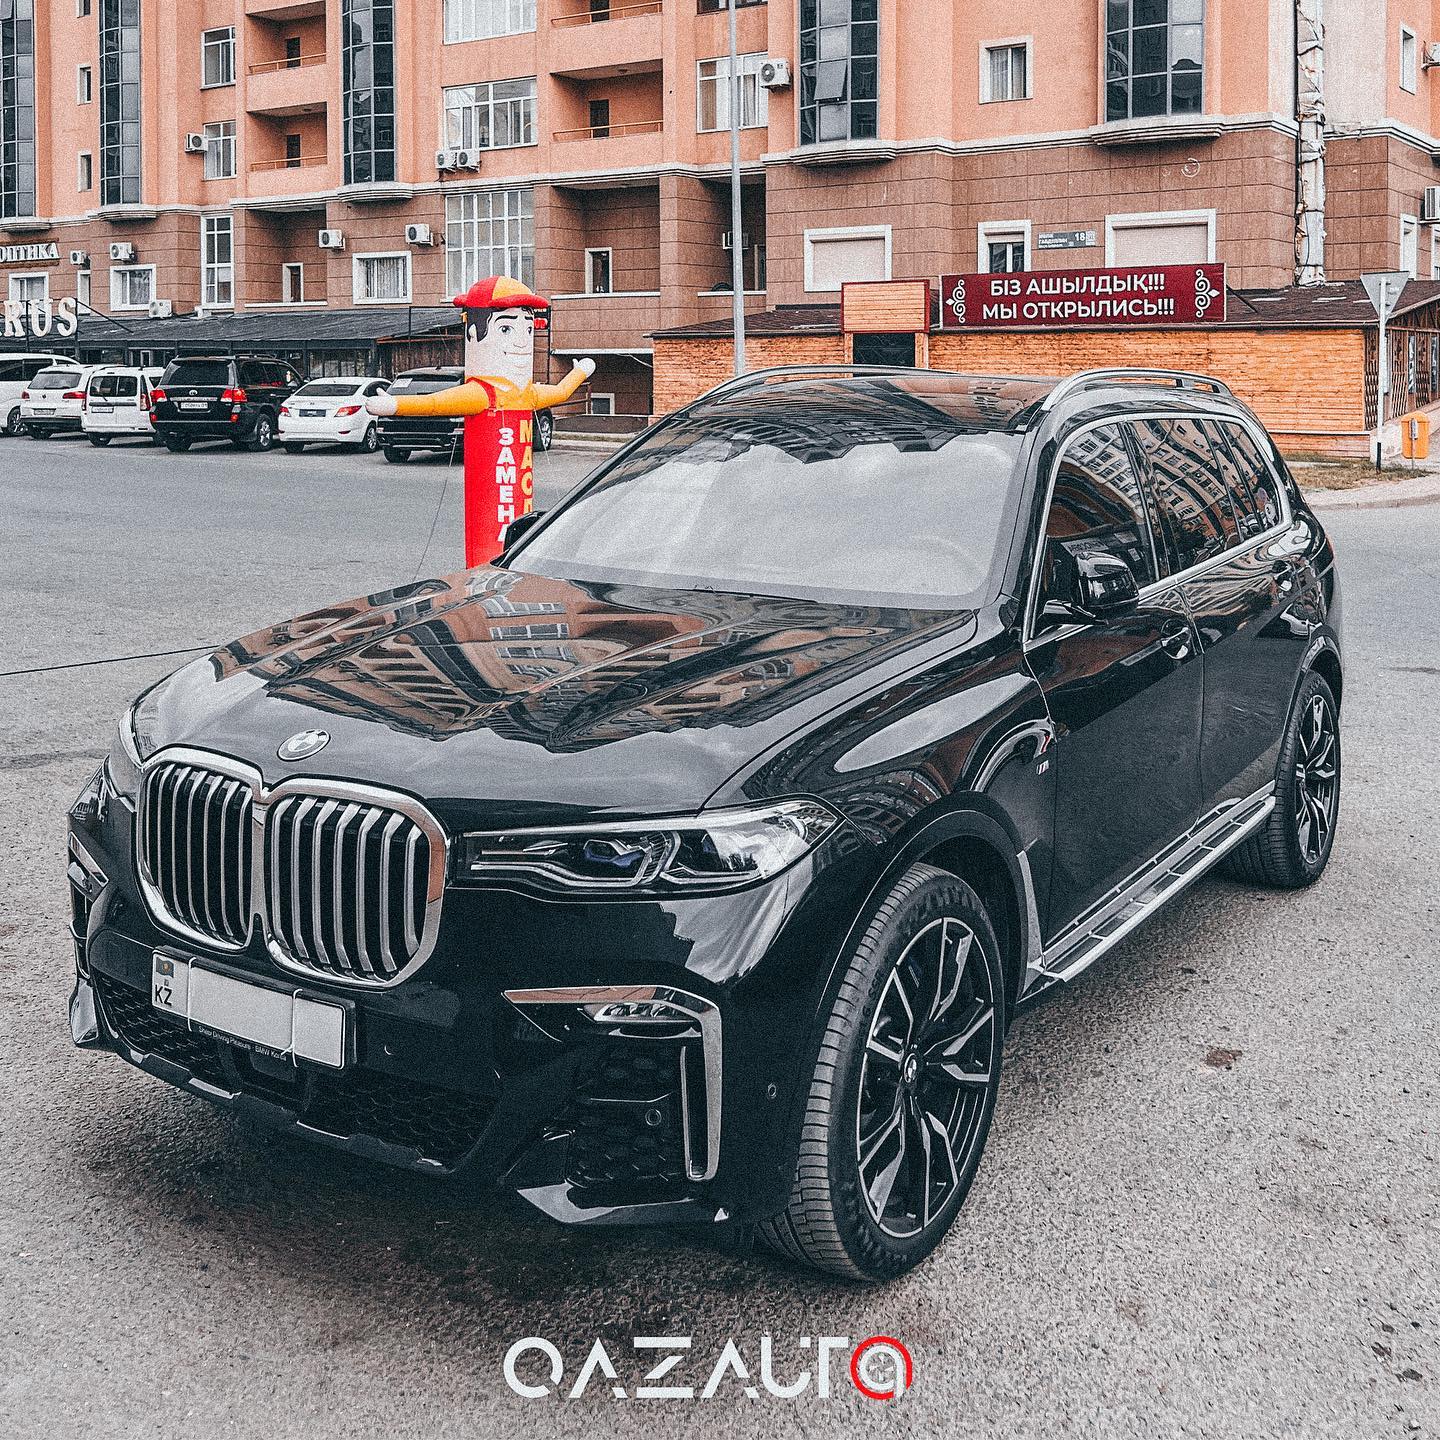 BMW X7 G07 on russification